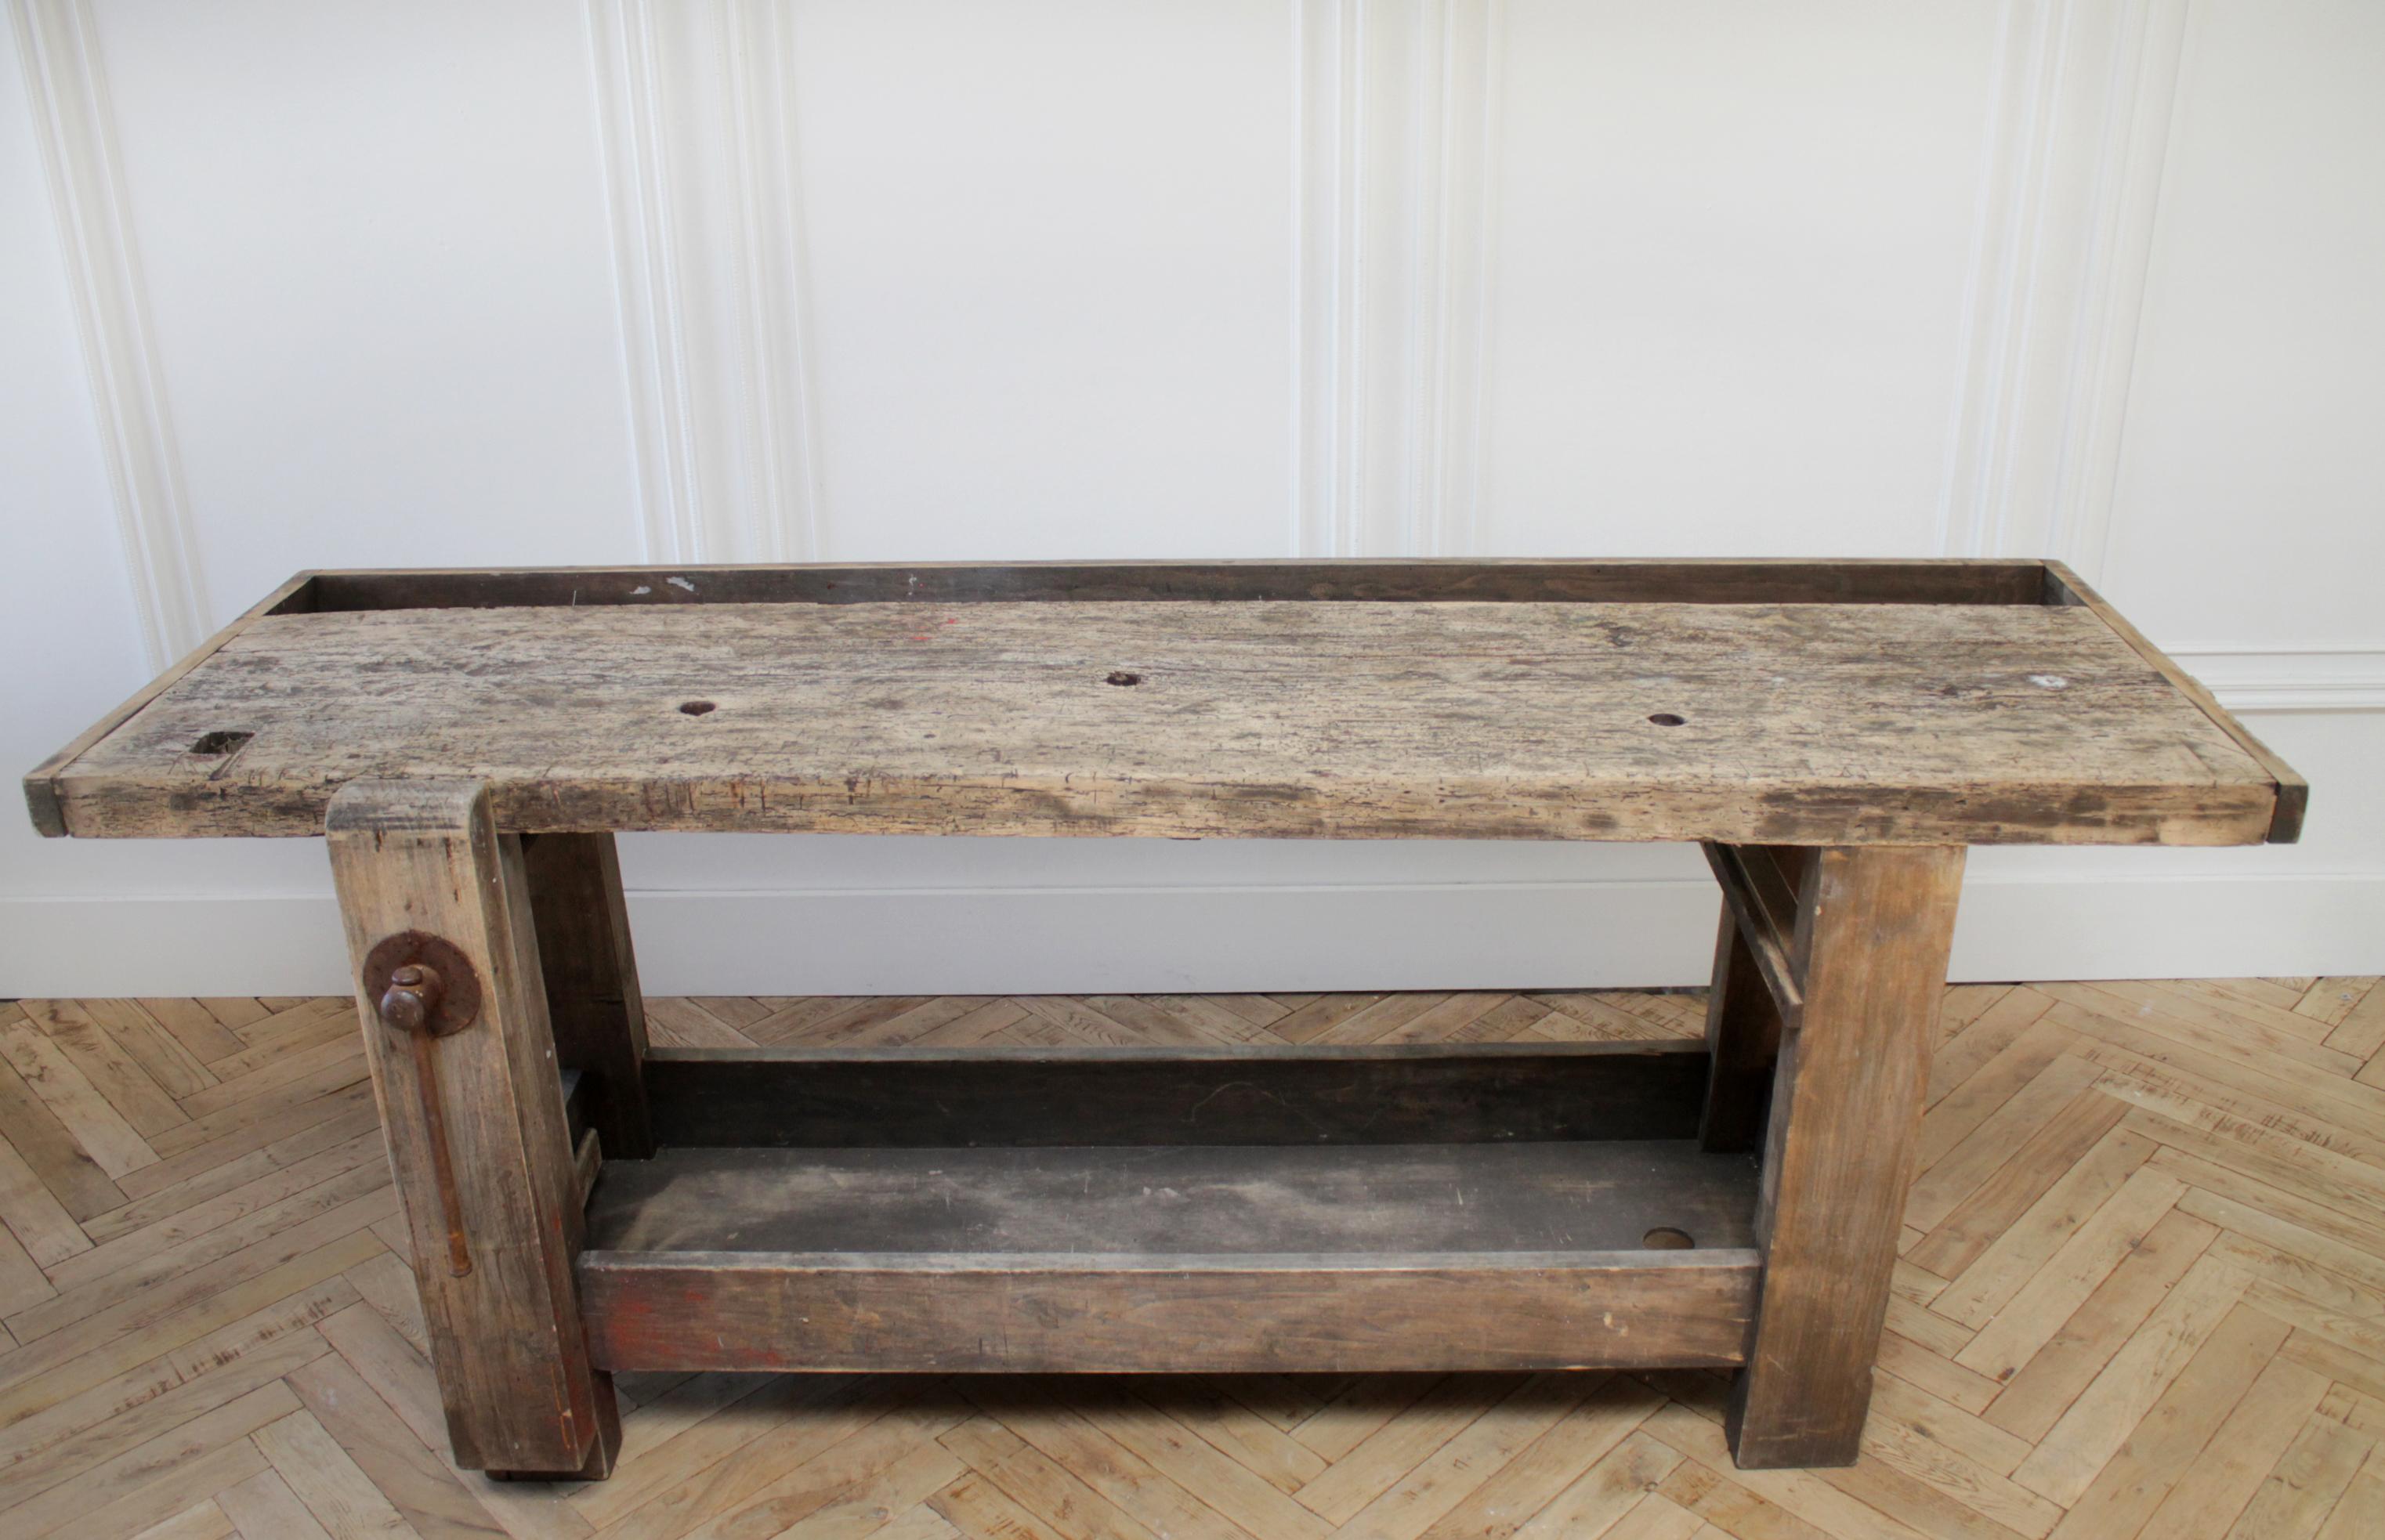 19th-20th century work console table with original hardware
This is a beautiful work table with lots of character. The wood is distressed, with light and dark tones. Very solid and sturdy, this would work great as an entry table, console table, or